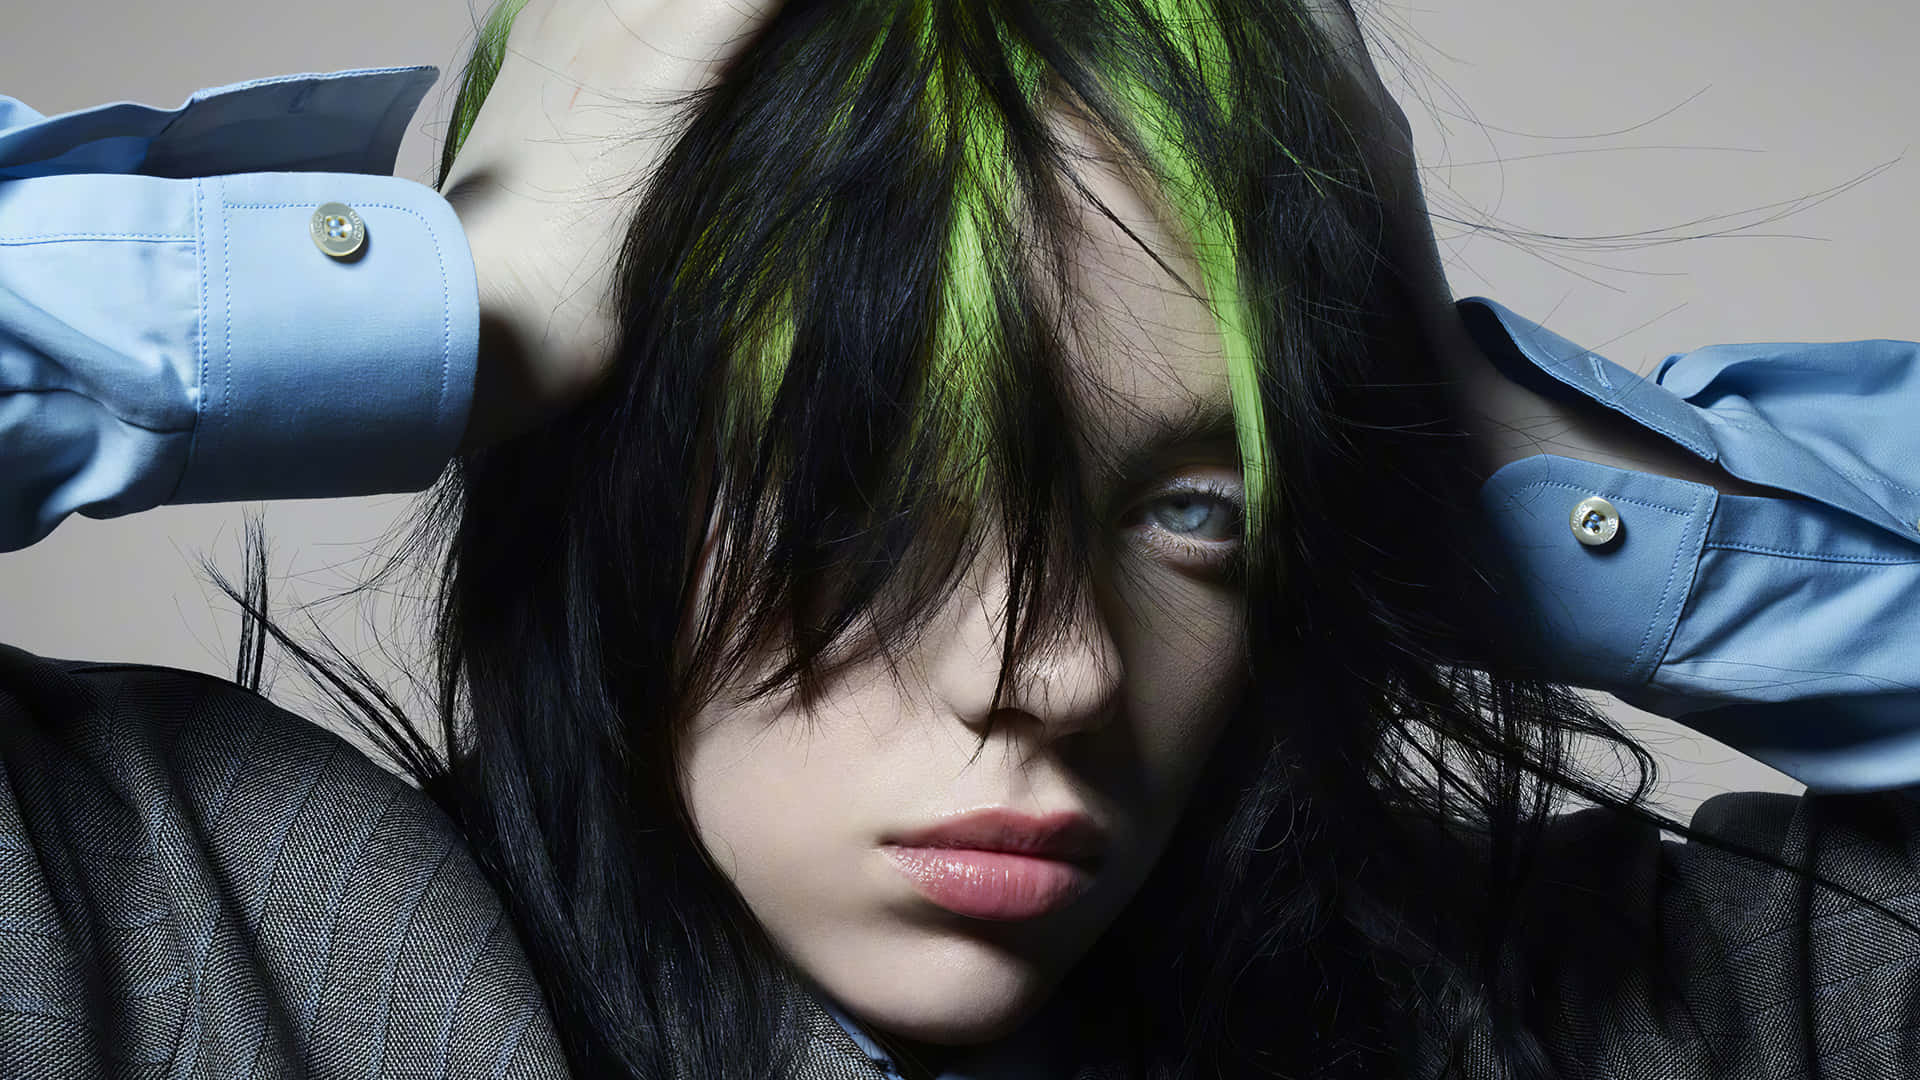 billie eilish vogue china june 2020 iPhone 11 Wallpapers Free Download